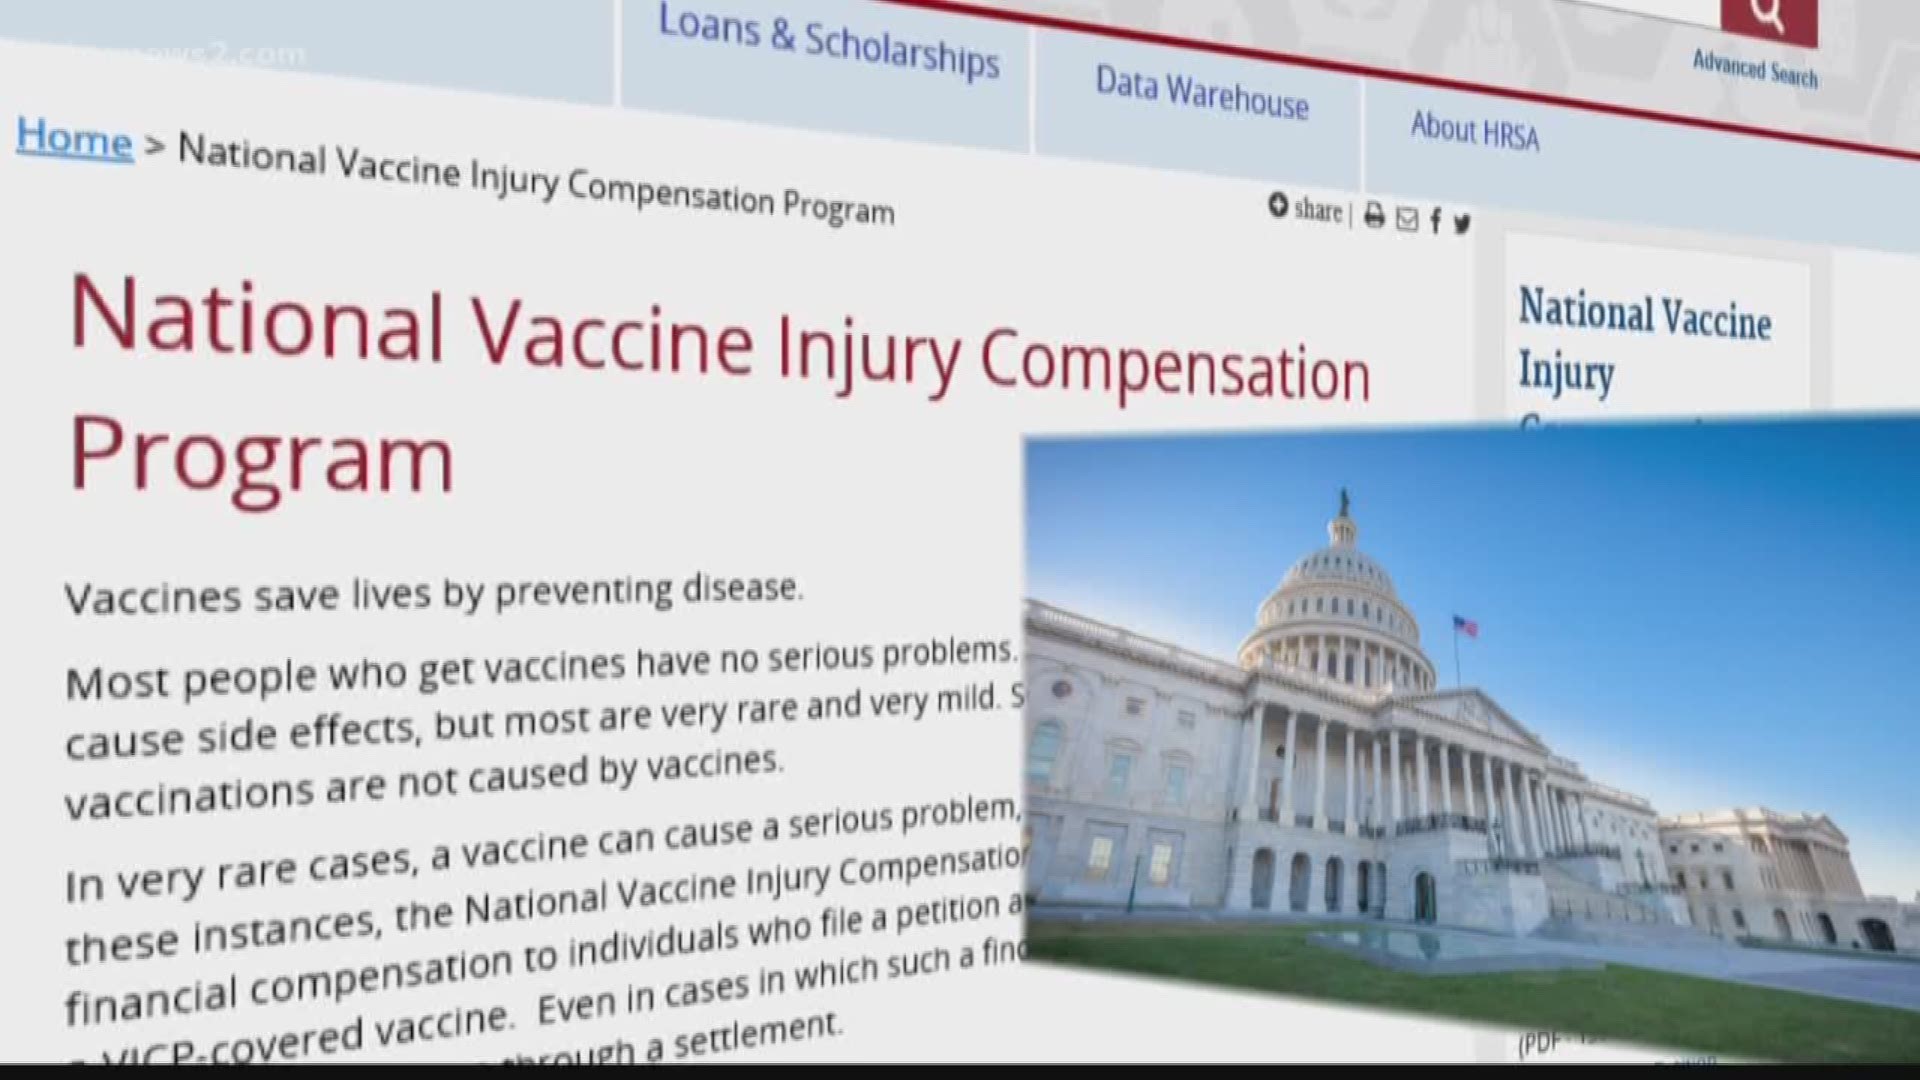 You know vaccines like the flu shot are made to keep you safe, but if you deal with bad side effects from vaccines, you could get compensation through a federal program.